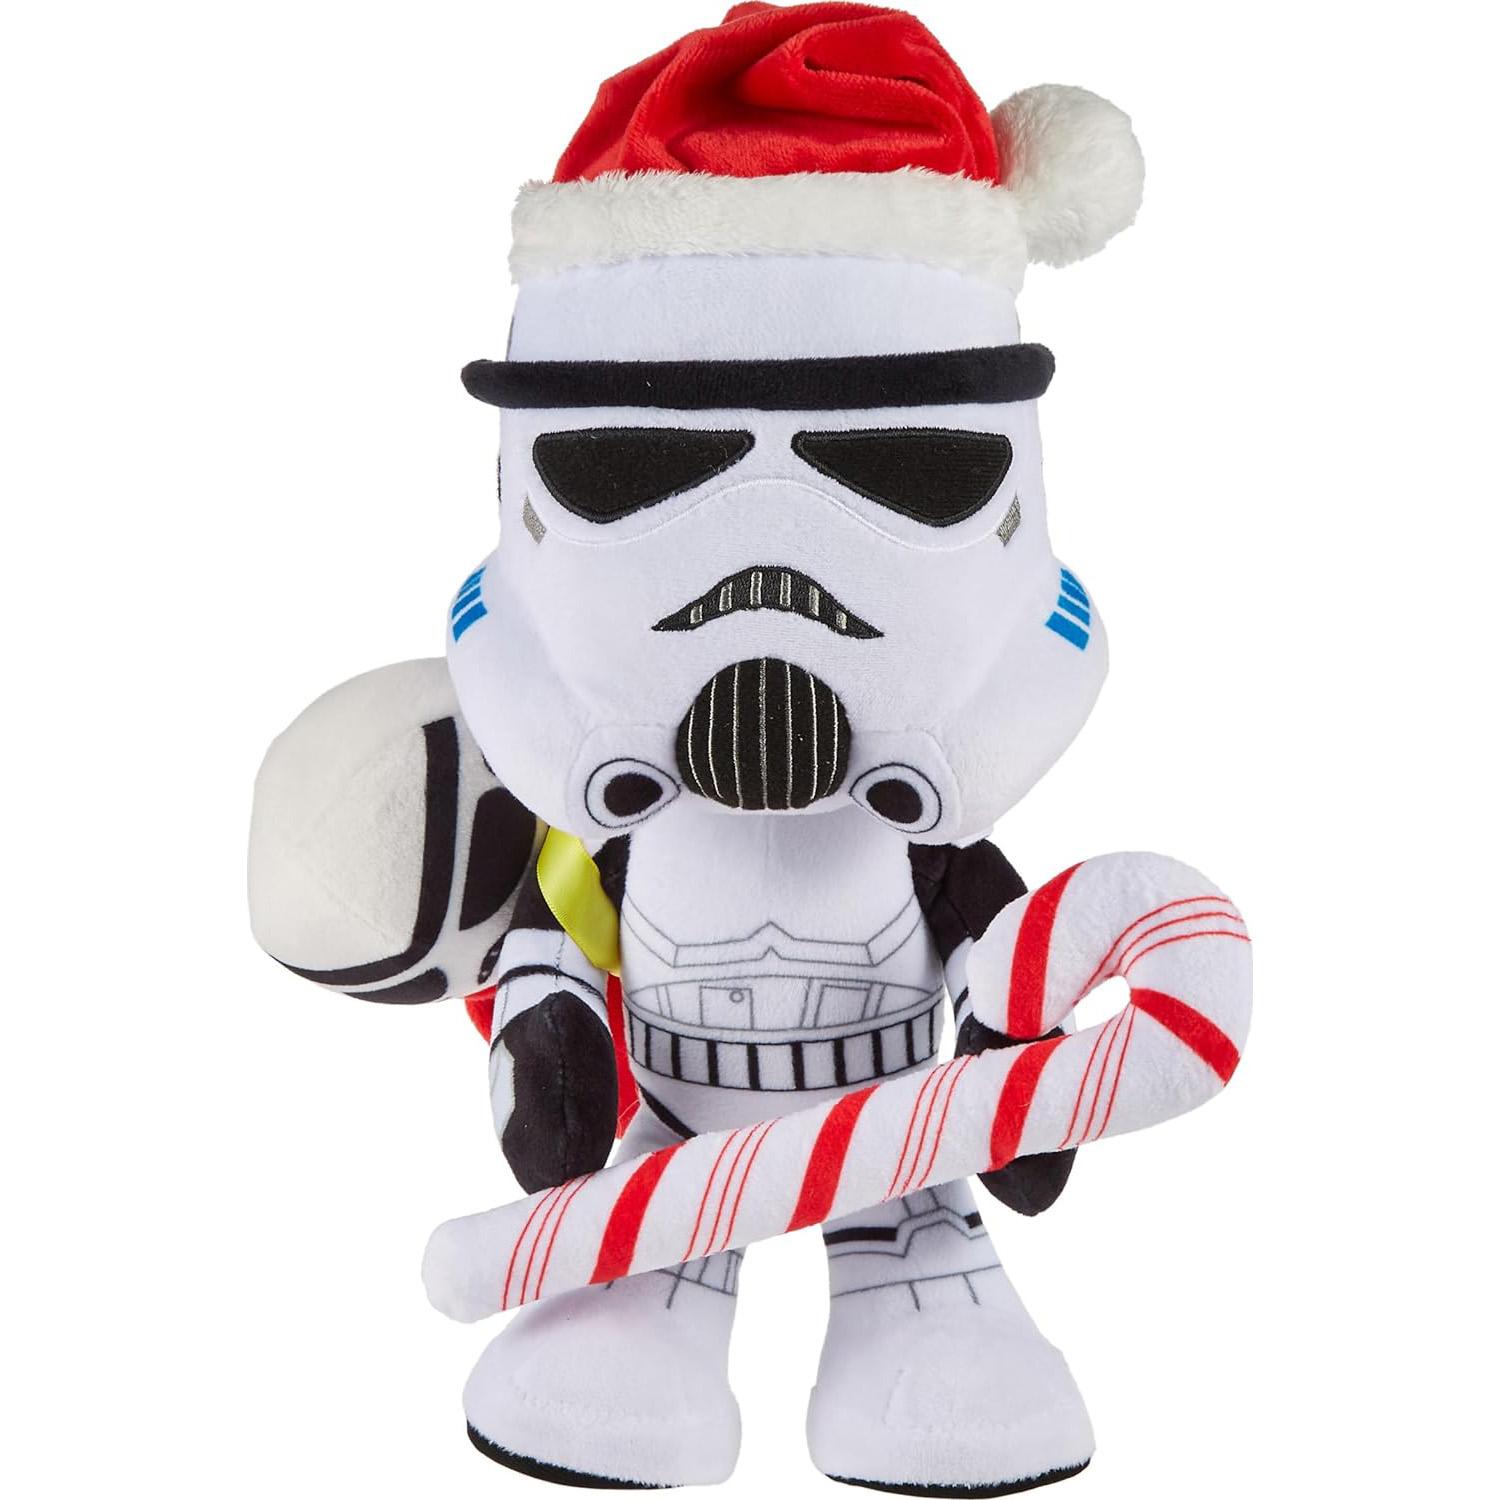 Star Wars Winter Stormtrooper Plush Toy Doll for $9.99